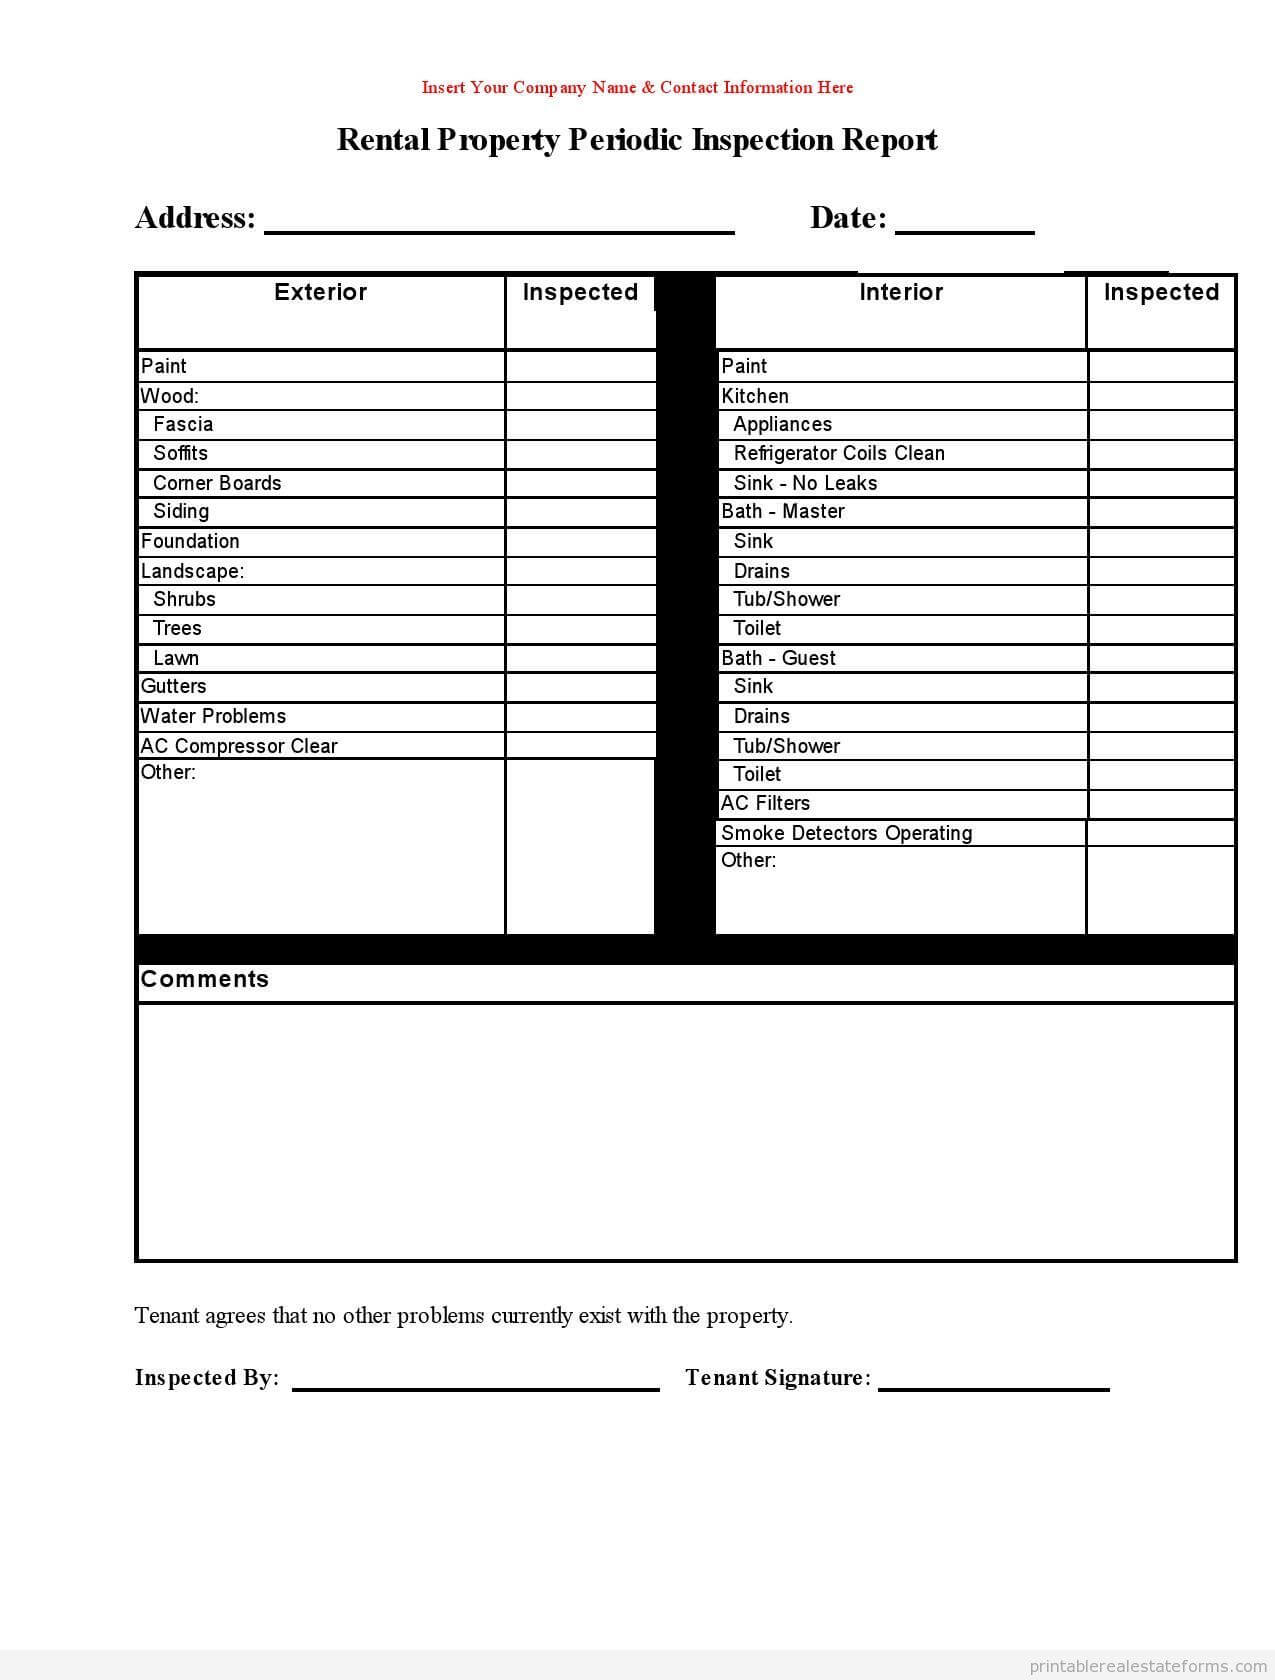 Free Printable Rental Property Periodic Inspection Report With Commercial Property Inspection Report Template